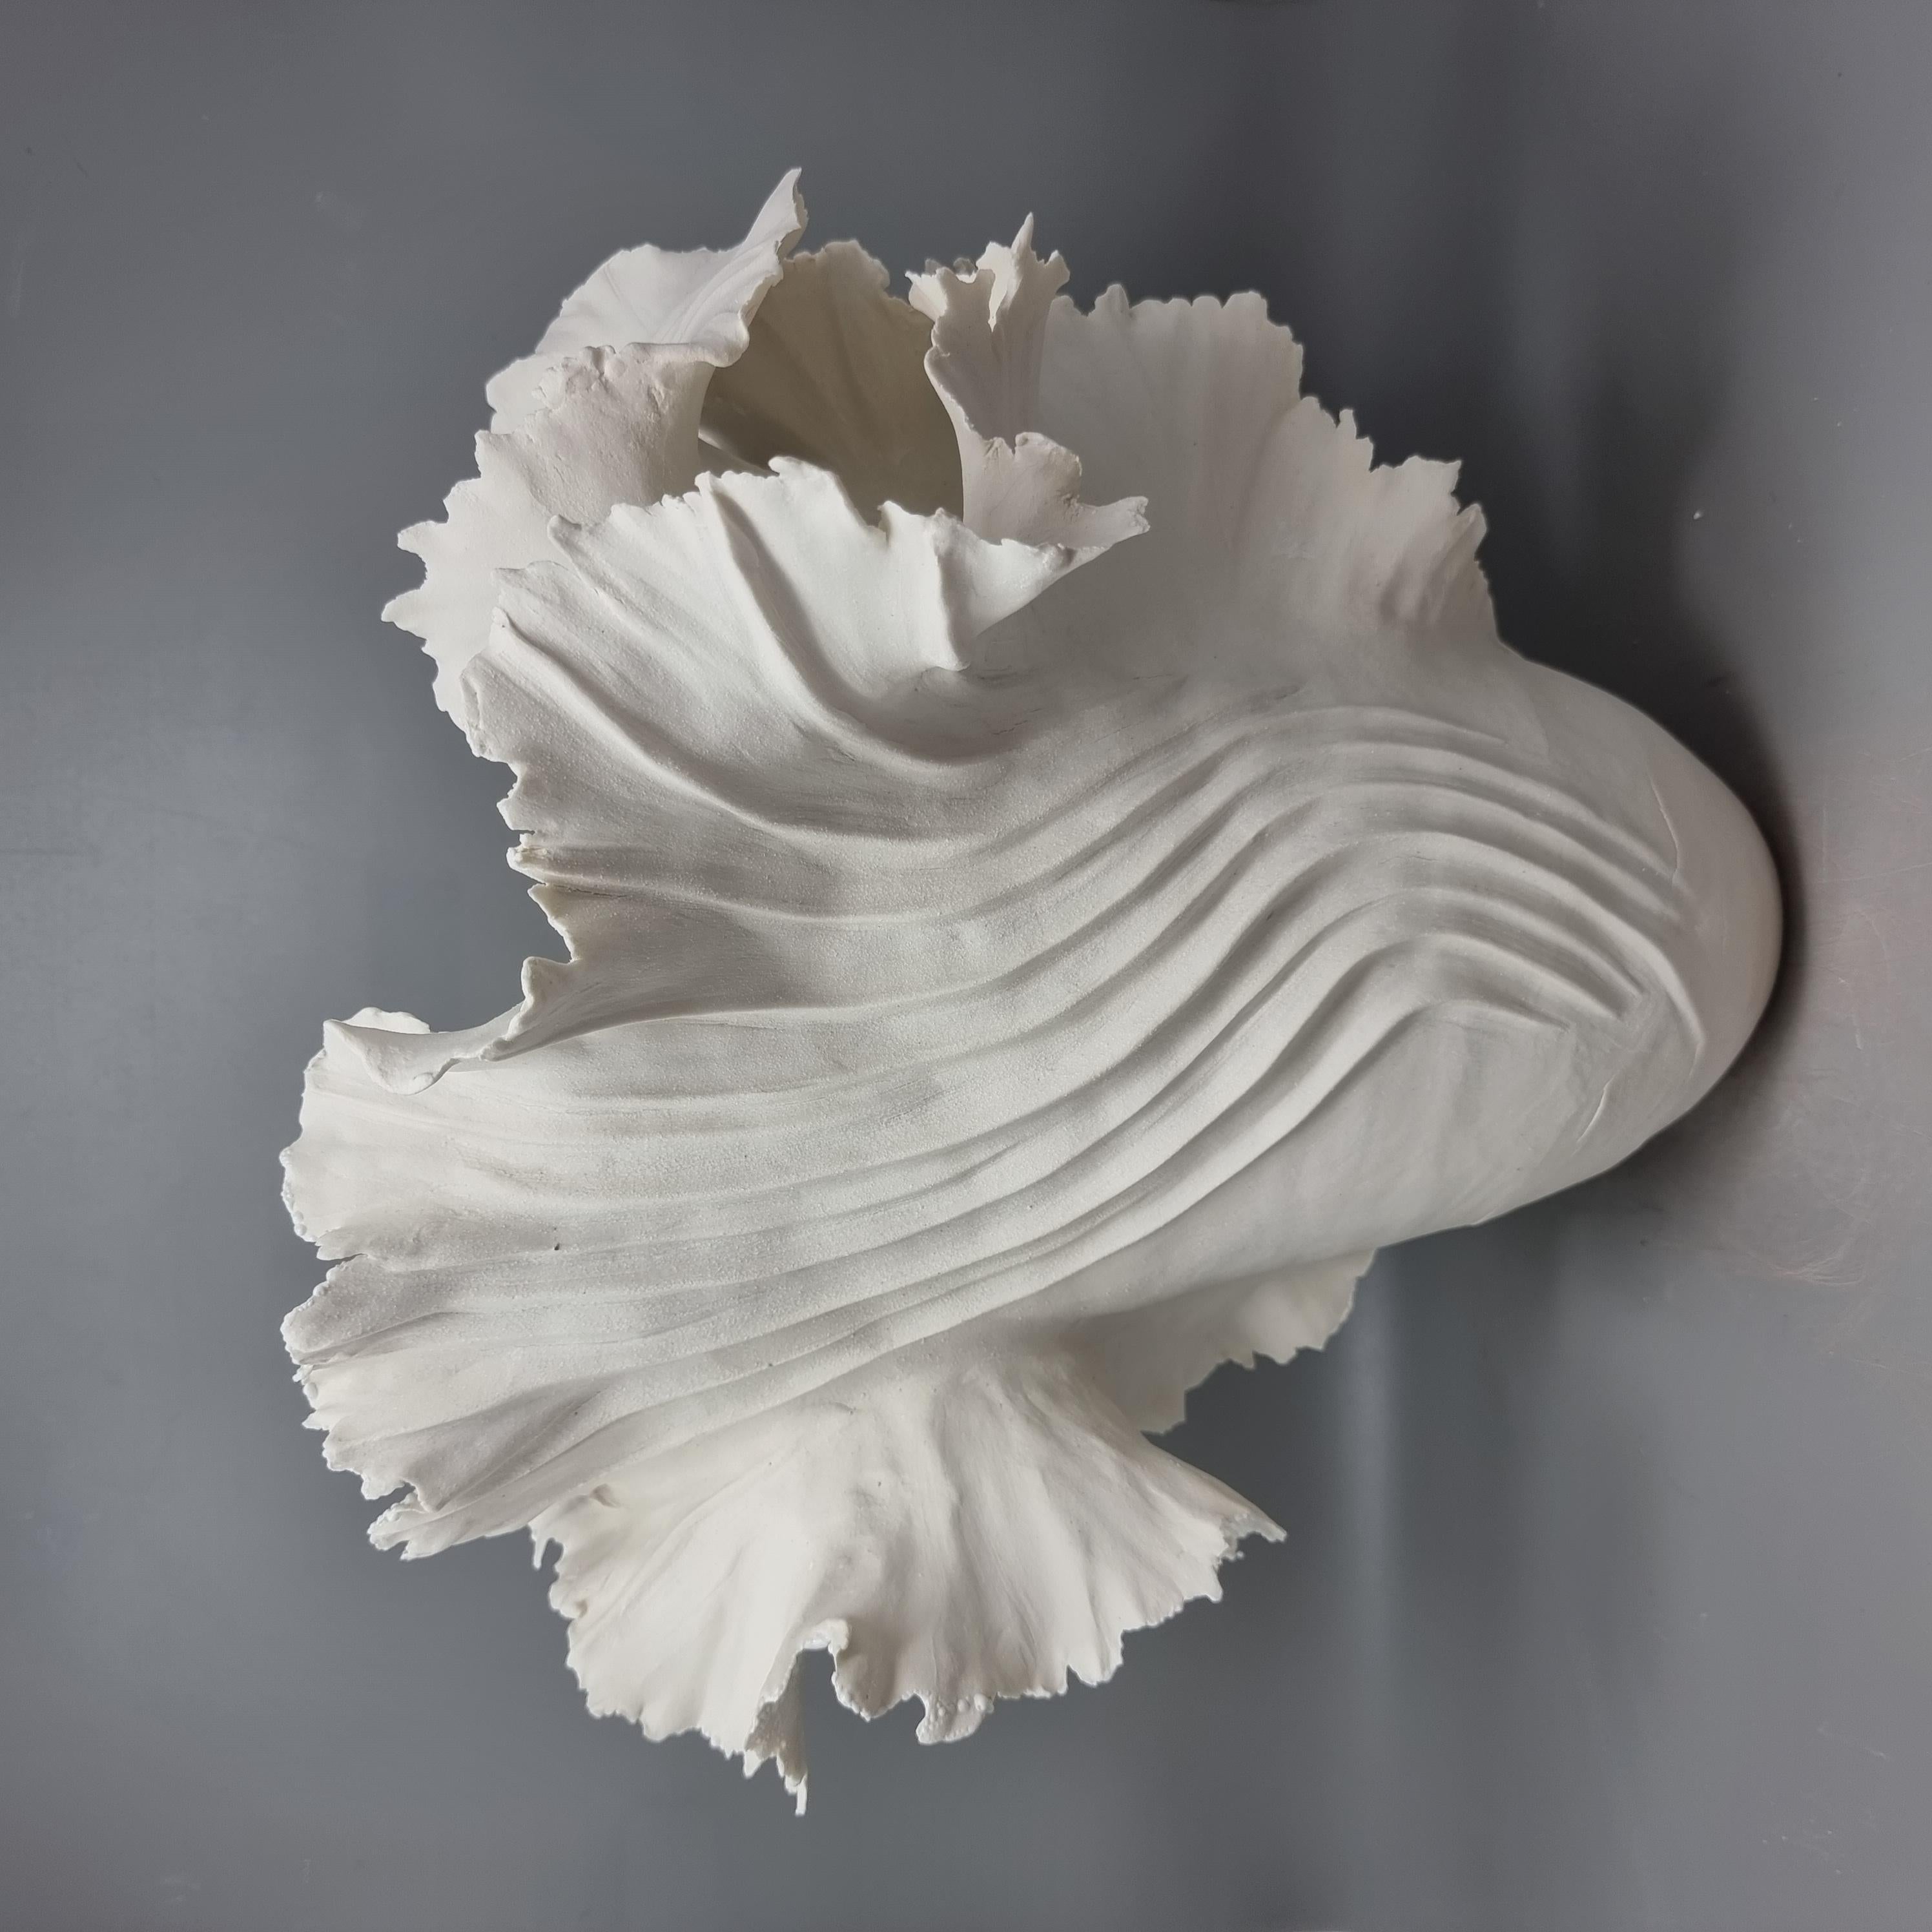 Hand-Crafted Wave Sculpture, Paperporcelain // 177